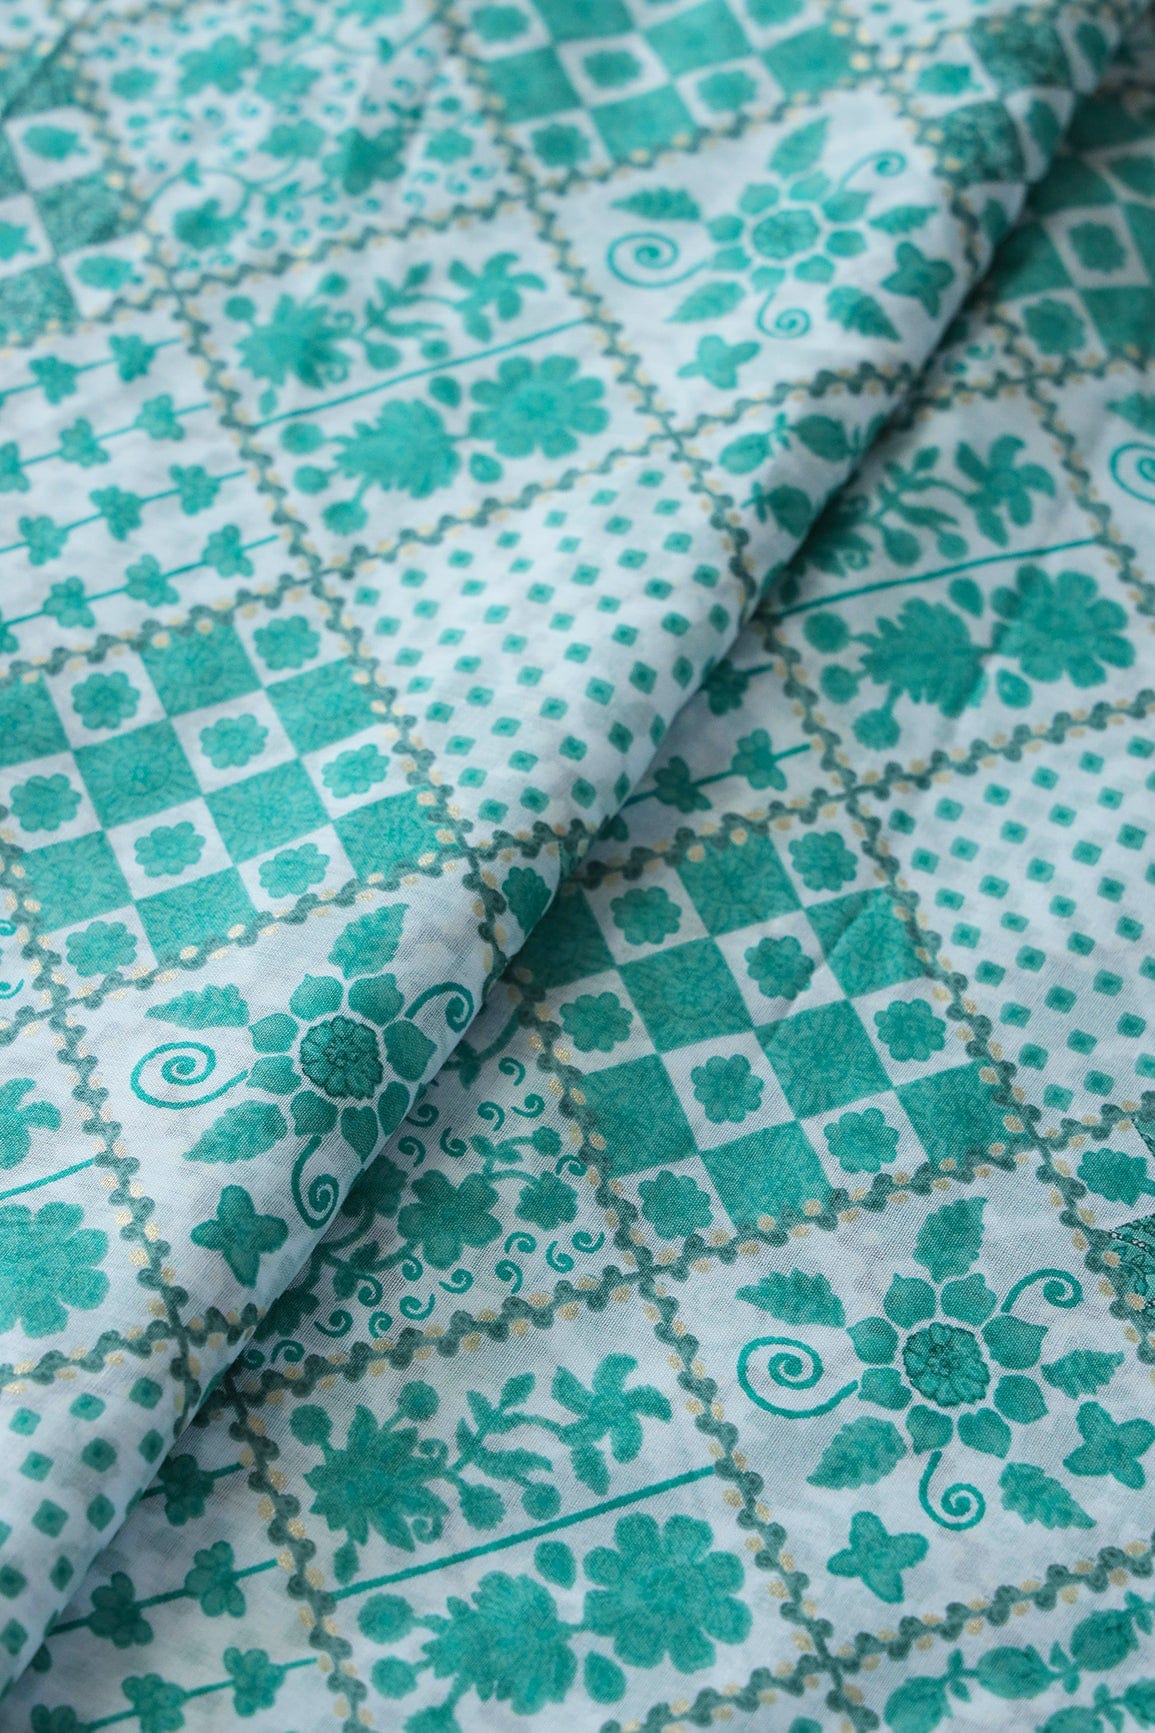 doeraa Prints Persian Green And White Geometric Pattern With Foil Print On Pure Mul Cotton Fabric